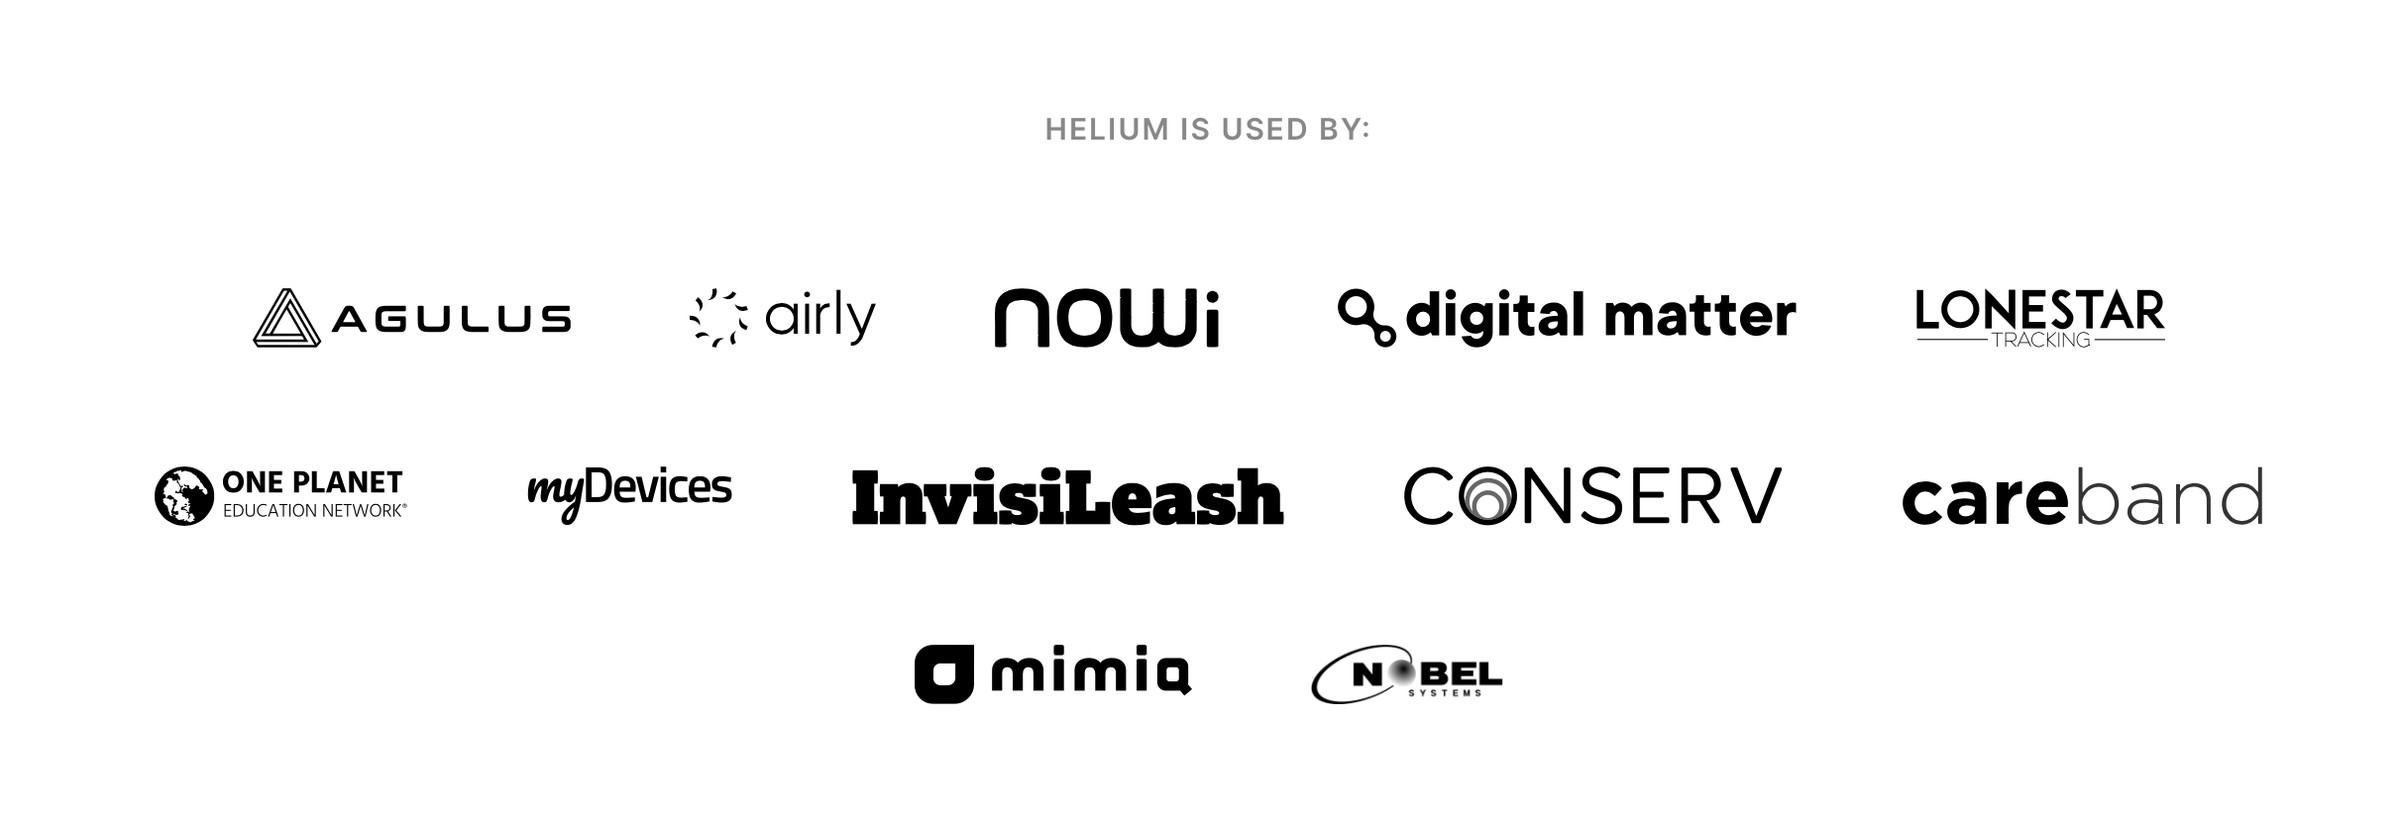 Helium’s website no longer mentions Lime or Salesforce.